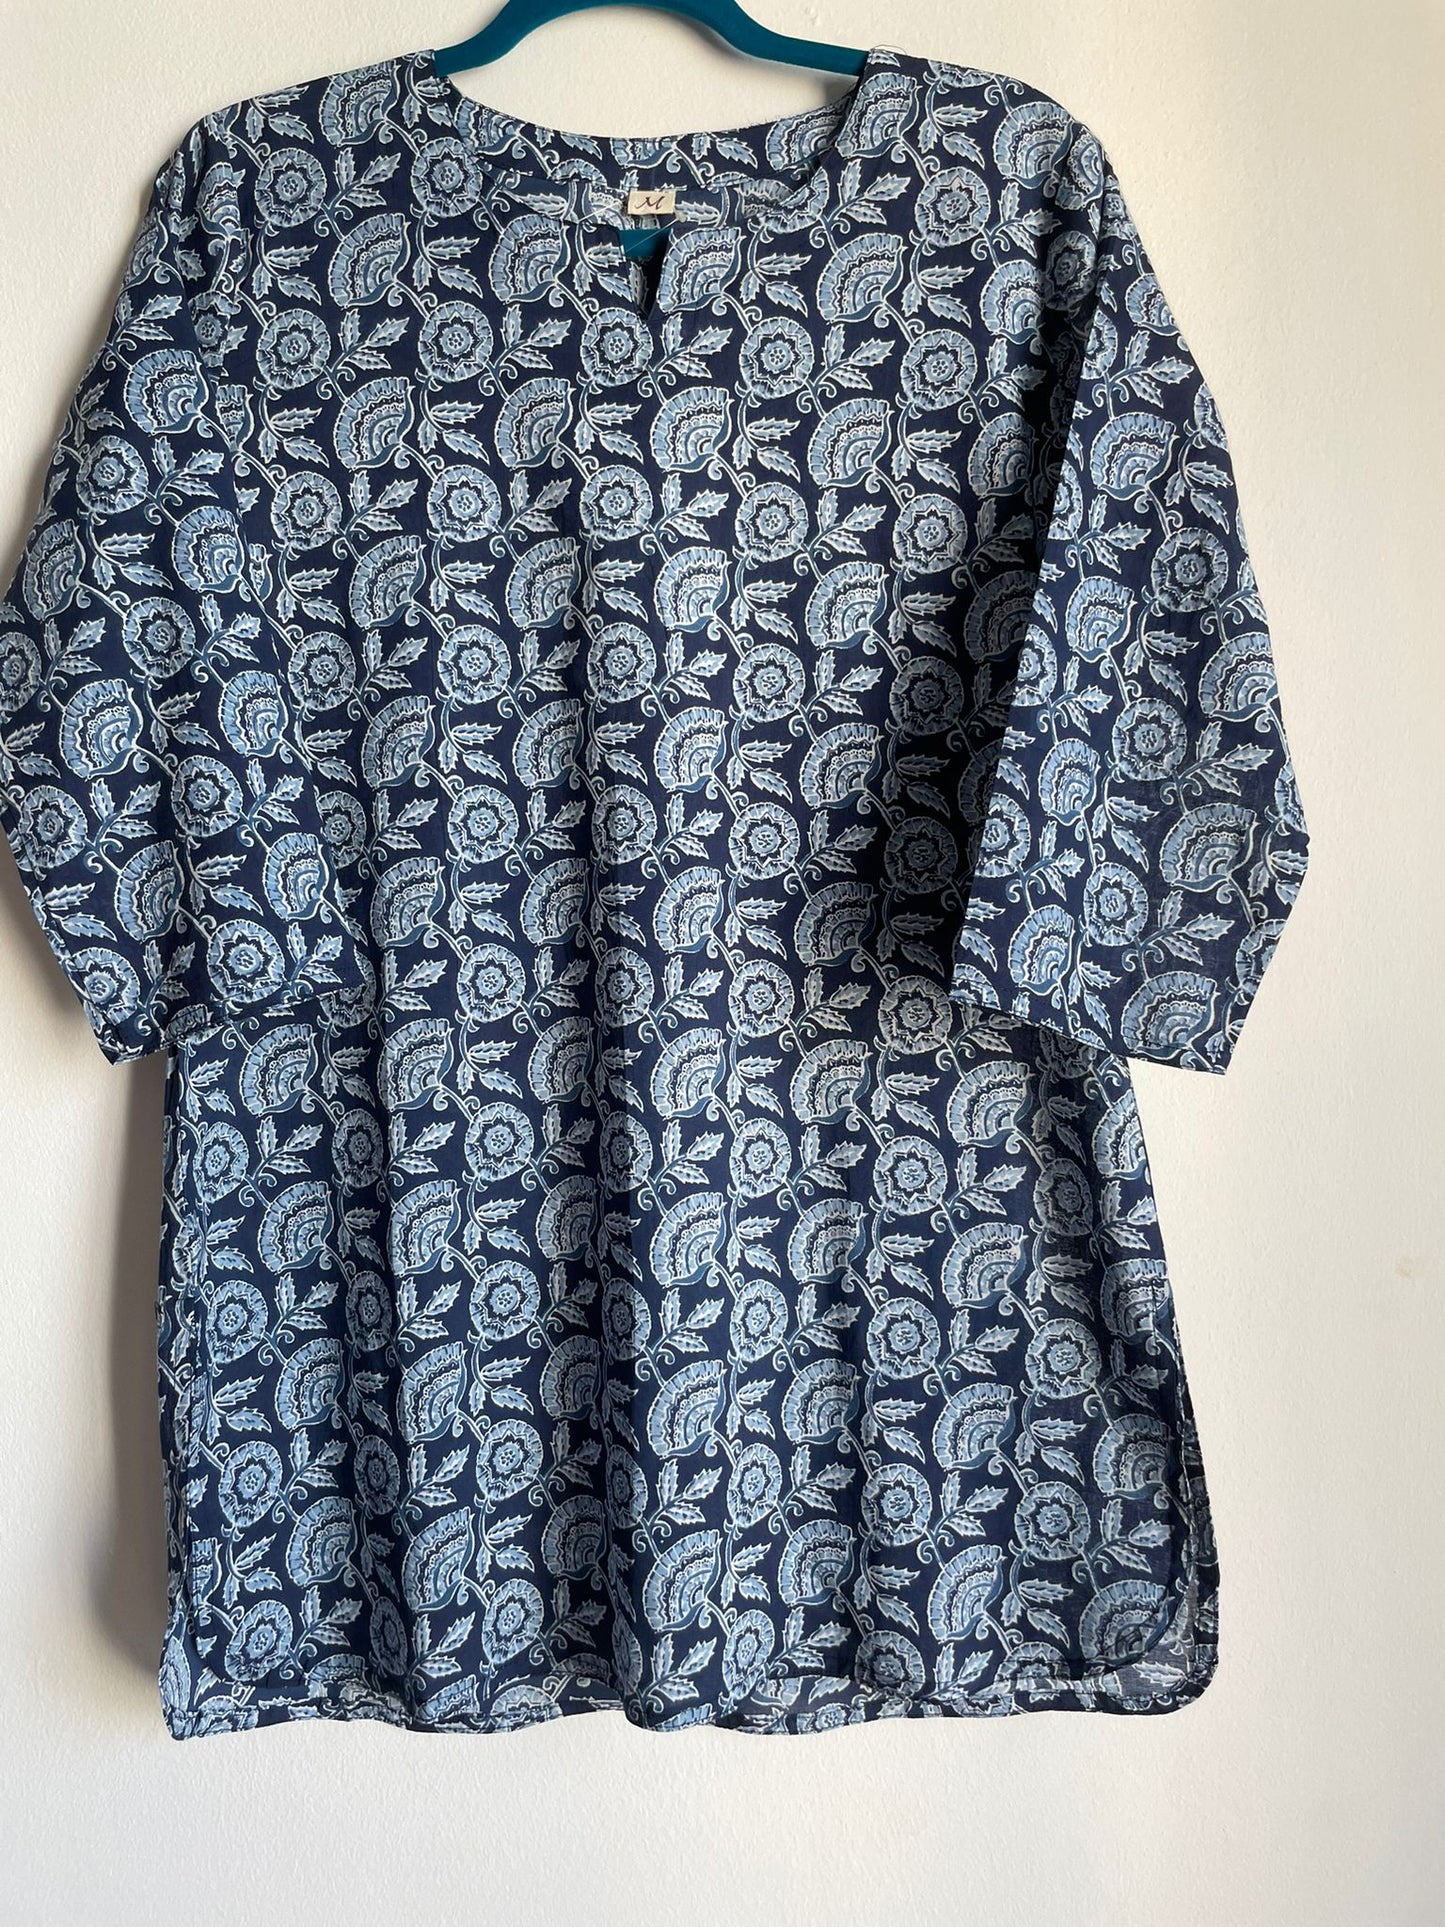 loungewear in blue floral block print. Perfect relaxing outfit made of 100 percent cotton